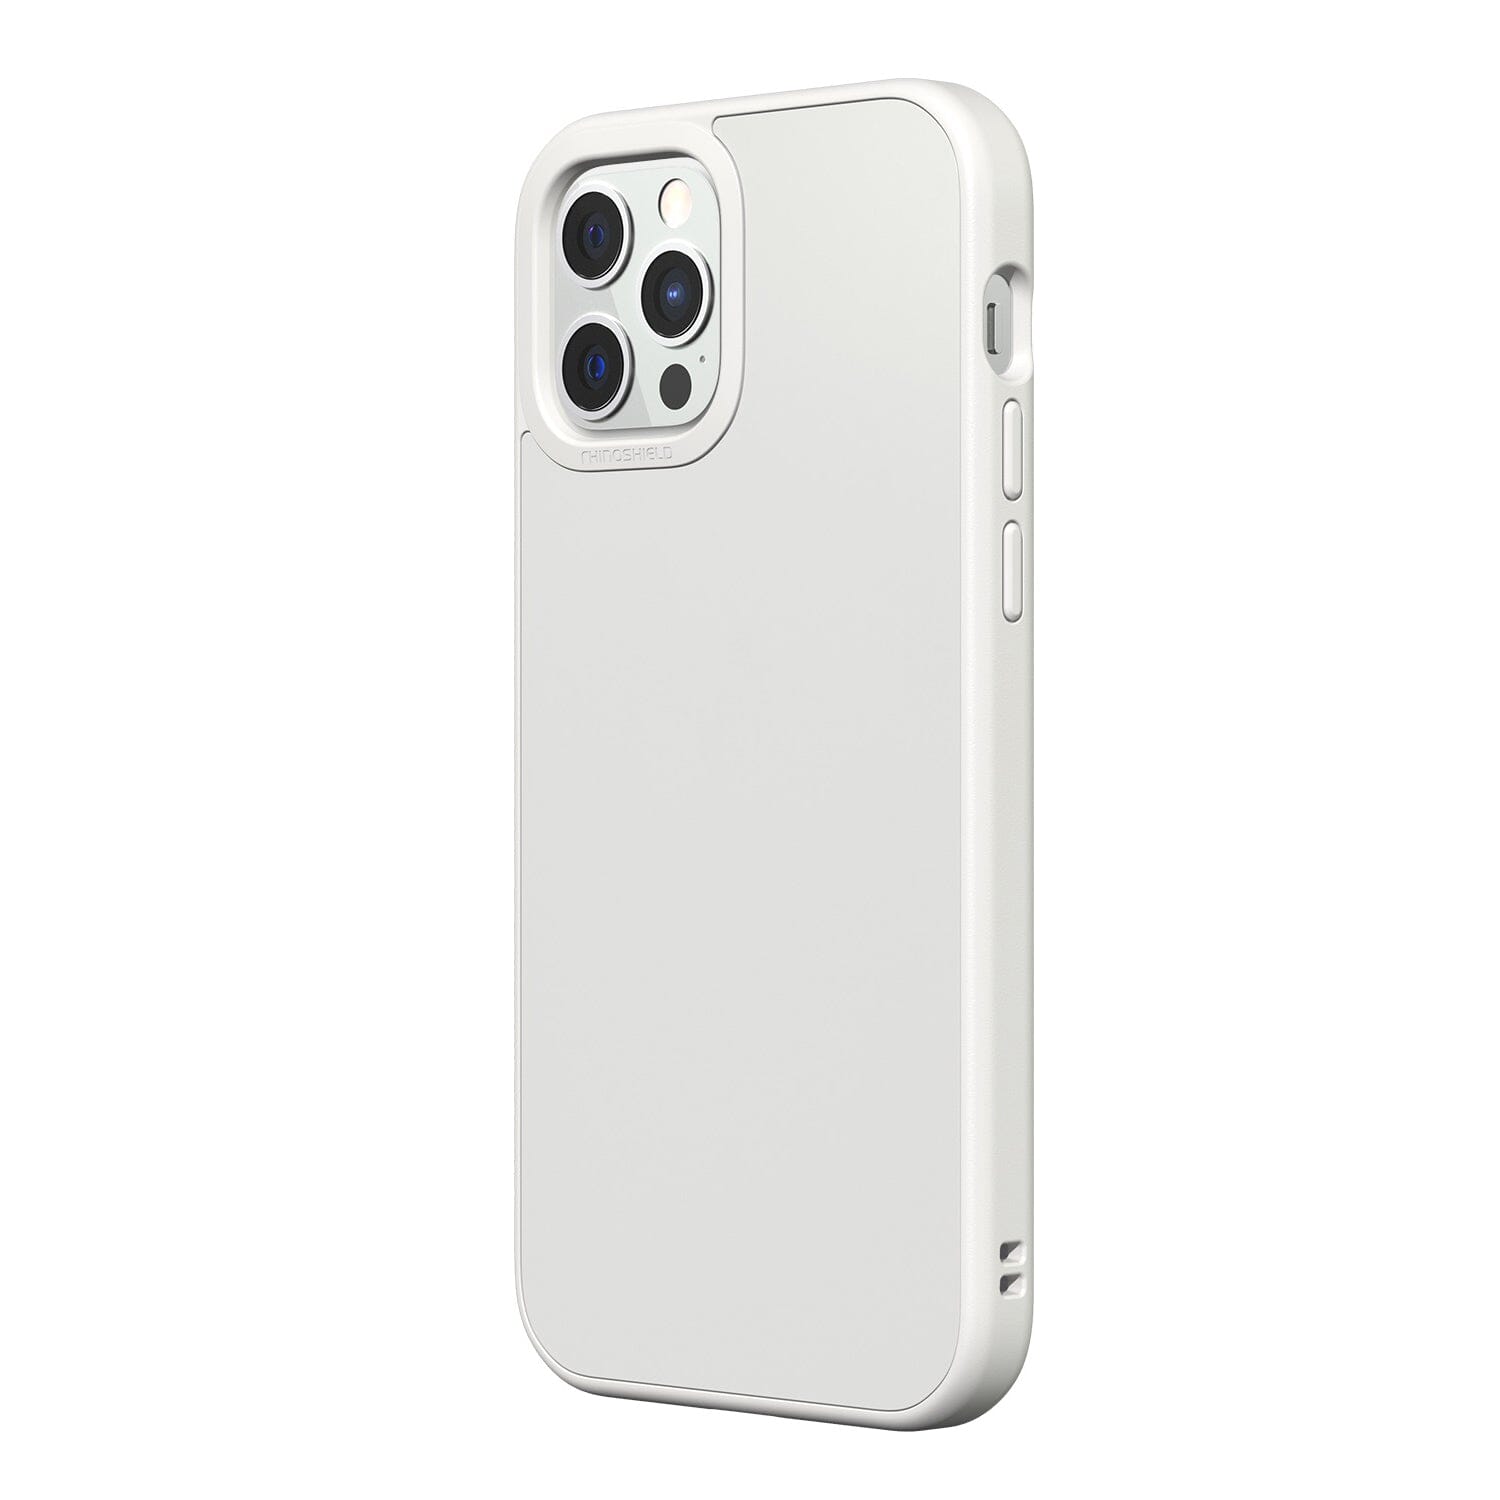 RhinoShield SolidSuit Protective Case with Premium Finish for iPhone 12 Series (2020) iPhone 12 Series RhinoShield iPhone 12 Pro Max 6.7" Classic White 